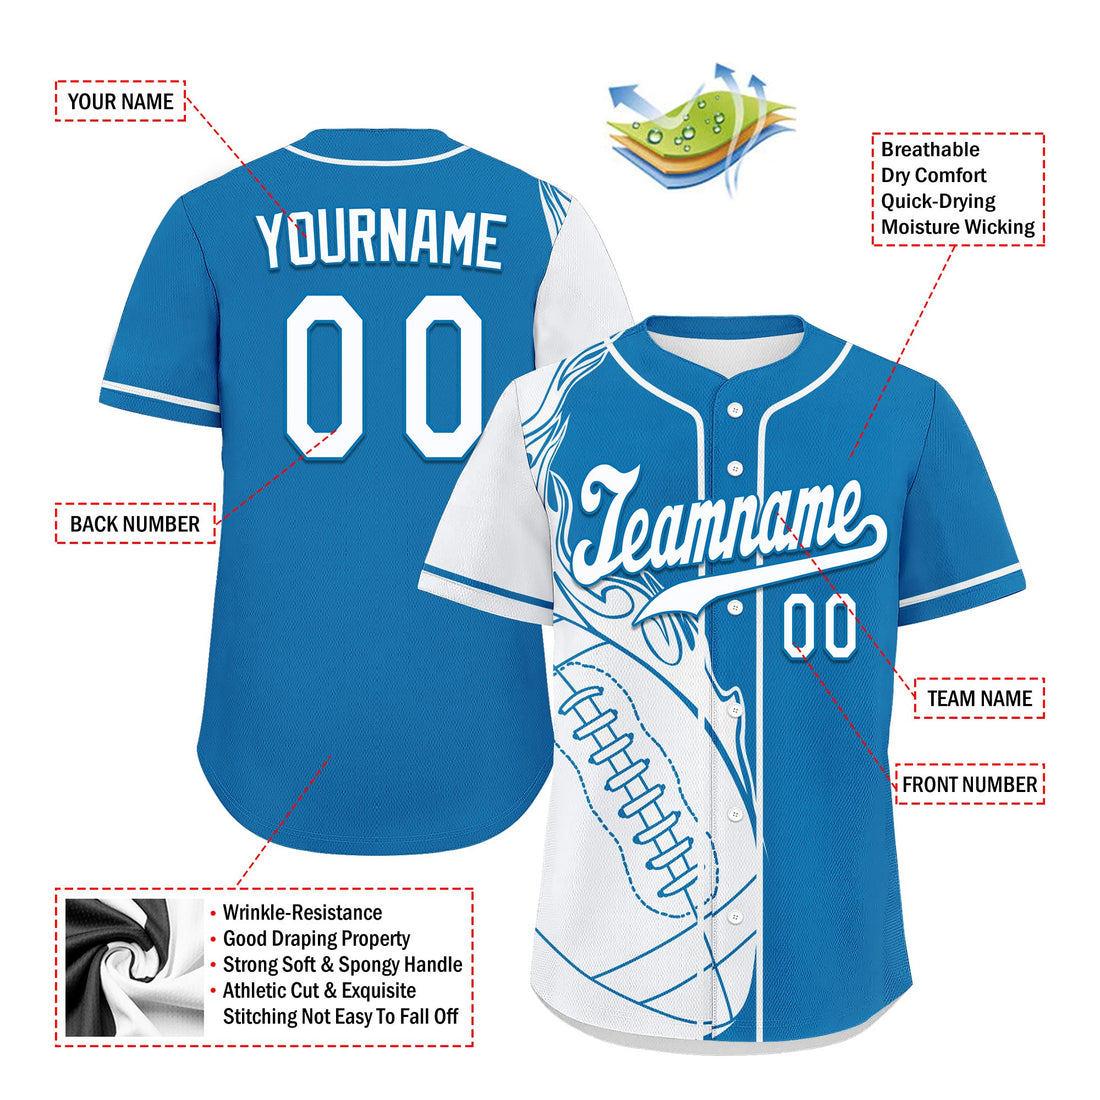 Custom Cyan White Classic Style Personalized Authentic Baseball Jersey UN002-D0b0a00-aa